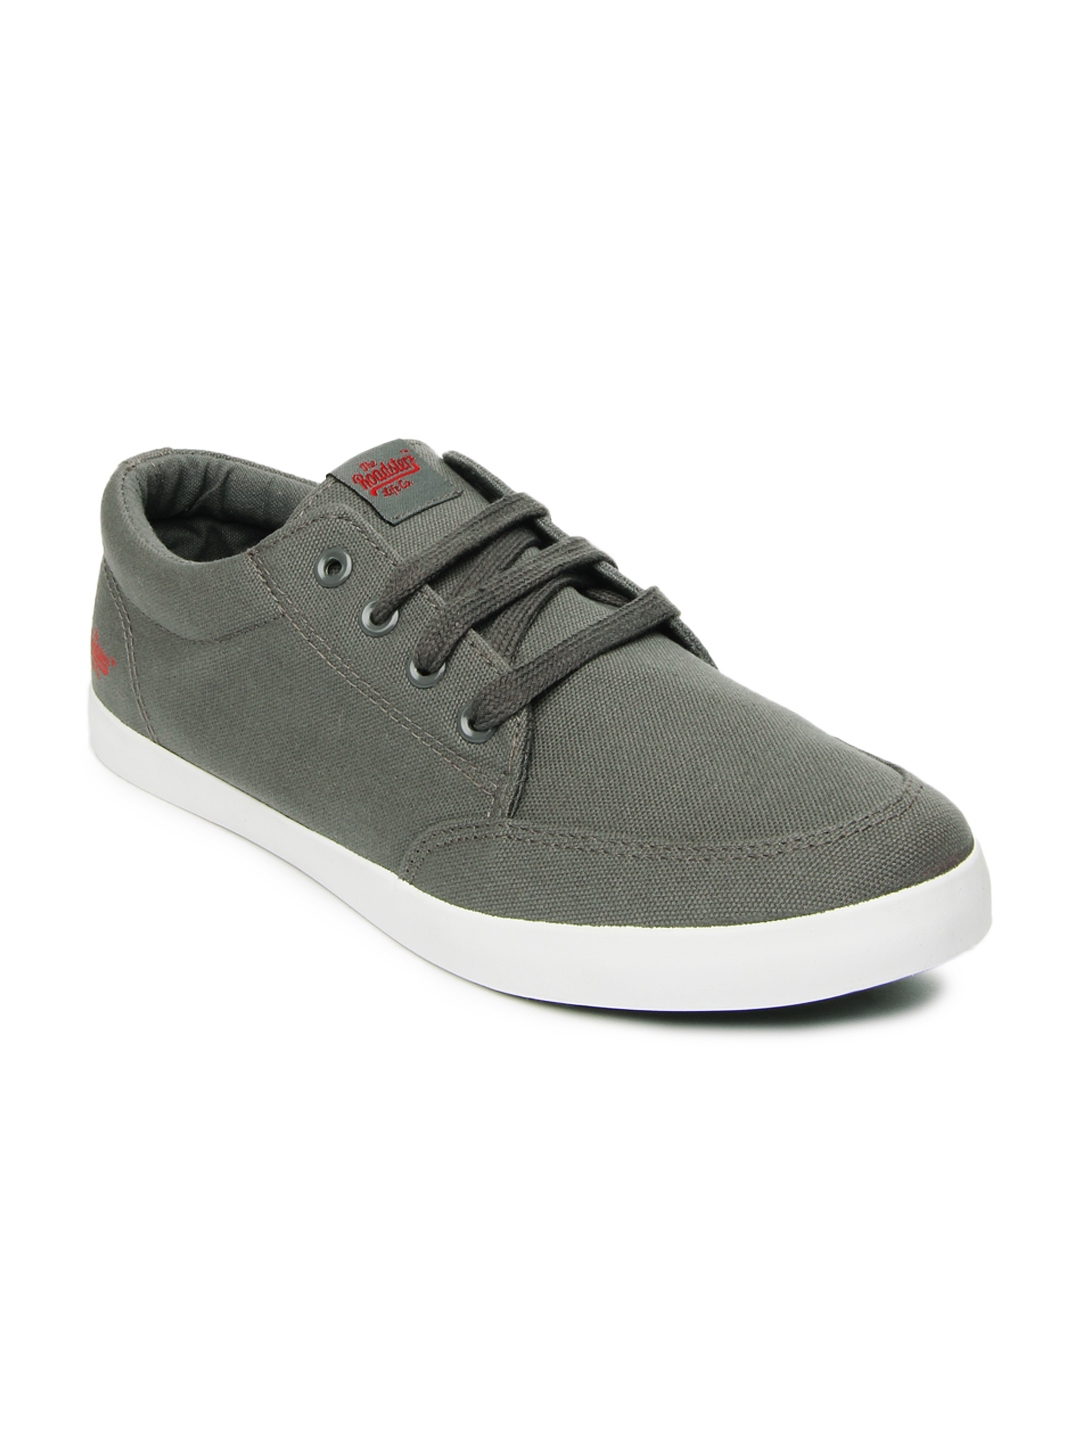 Buy Roadster Men Grey Casual Shoes - Casual Shoes for Men 426208 | Myntra